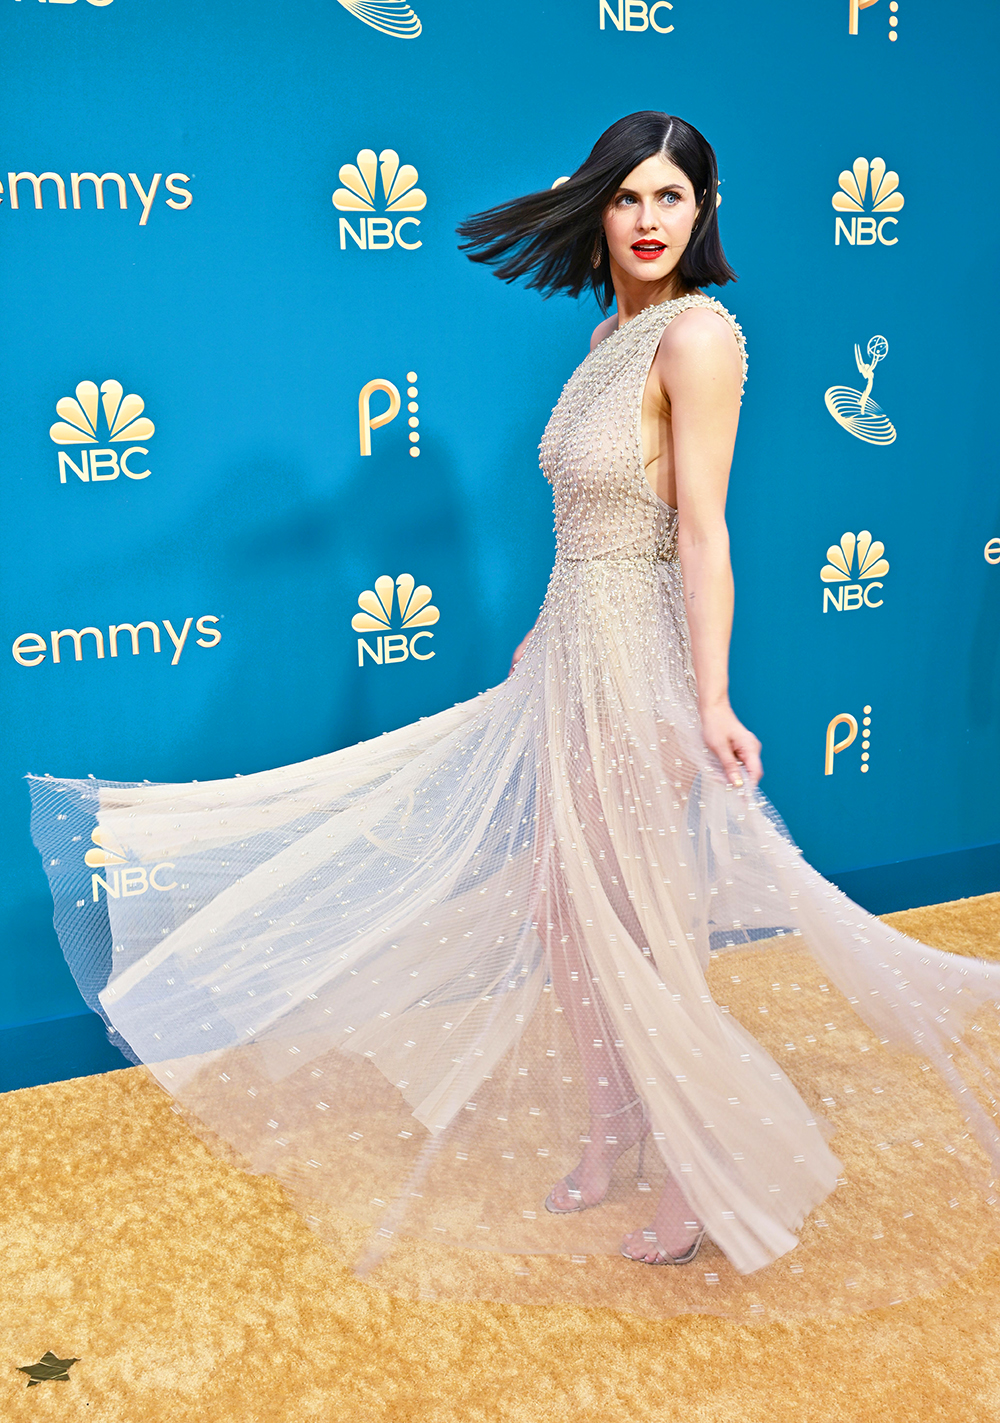 The Best Emmys Red Carpet Dresses of All Time